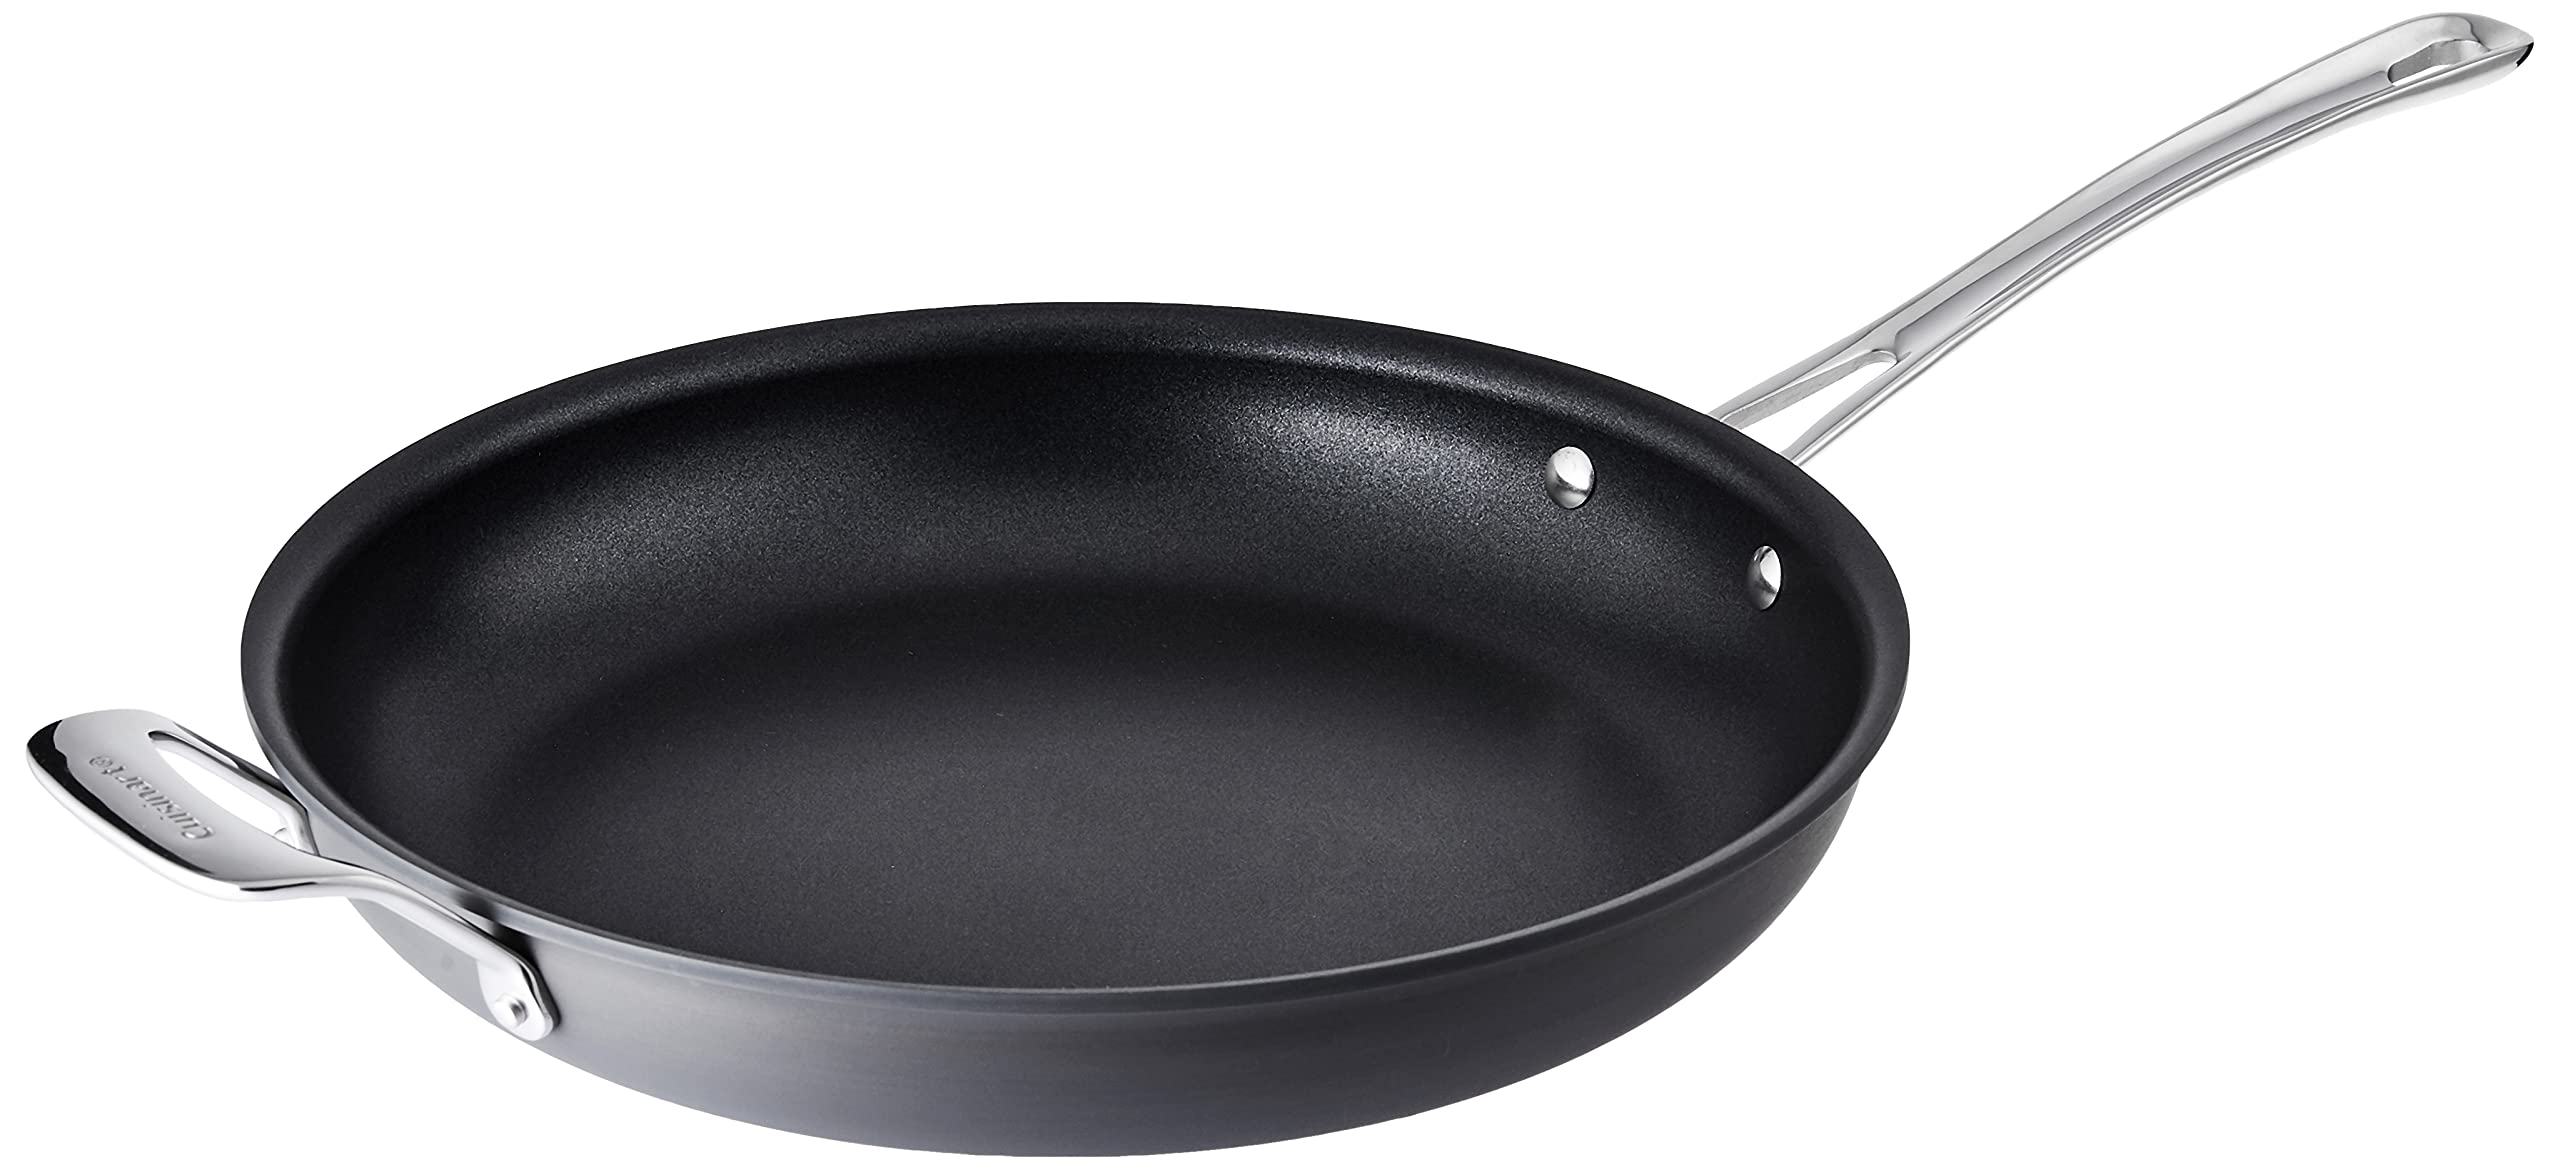 12" Cuisinart Contour Hard Anodized Open Skillet w/ Helper Handle $15 + Free Shipping w/ Prime or on $35+